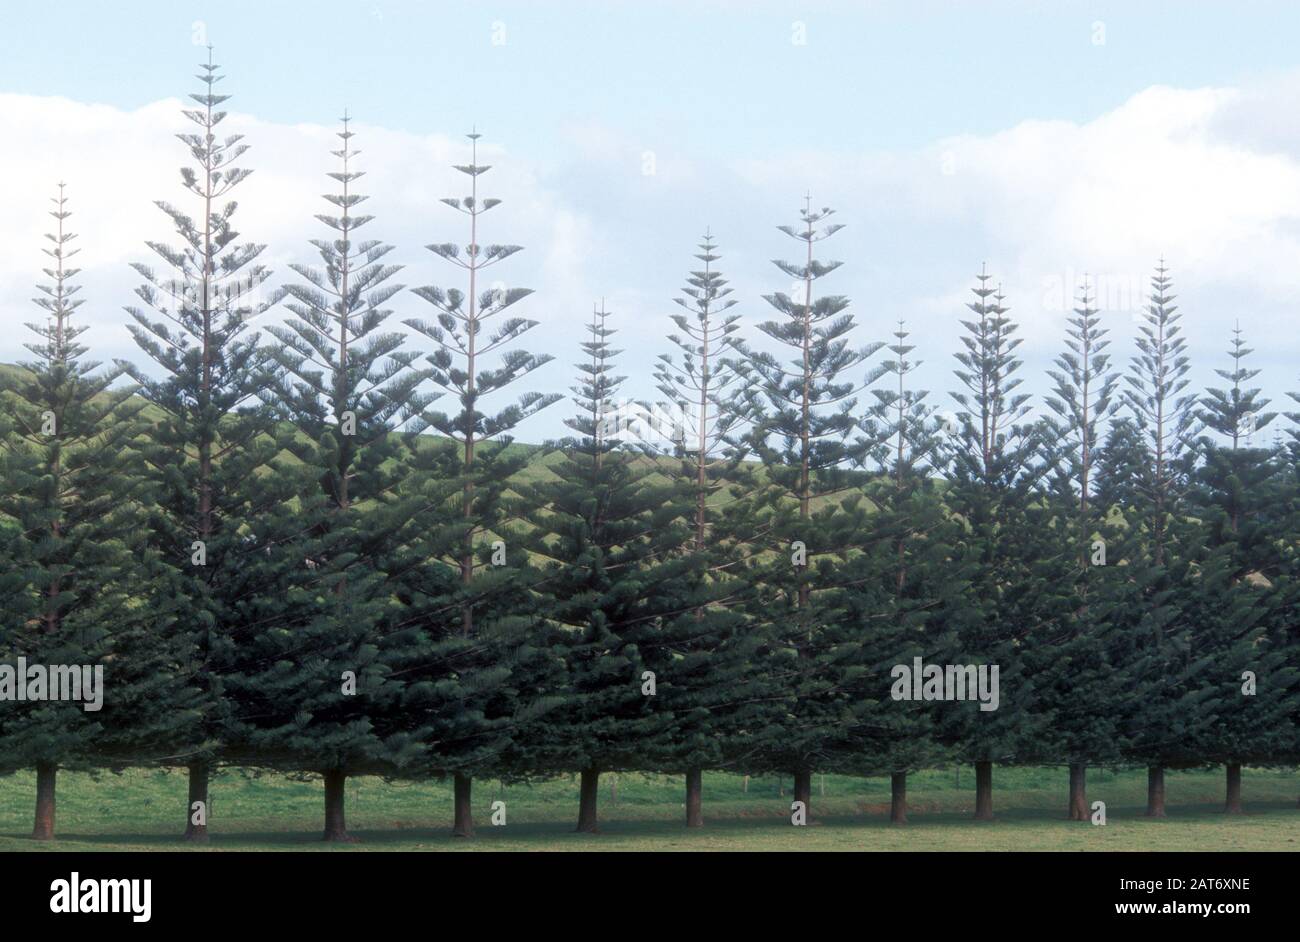 ROW OF NORFOLK ISLAND PINE TREES (ARAUCARIA HETEROPHYLLA) ENDEMIC TO NORFOLK ISLAND, NEW SOUTH WALES, AUSTRALIA, A SMALL ISLAND IN THE PACIFIC OCEAN. Stock Photo